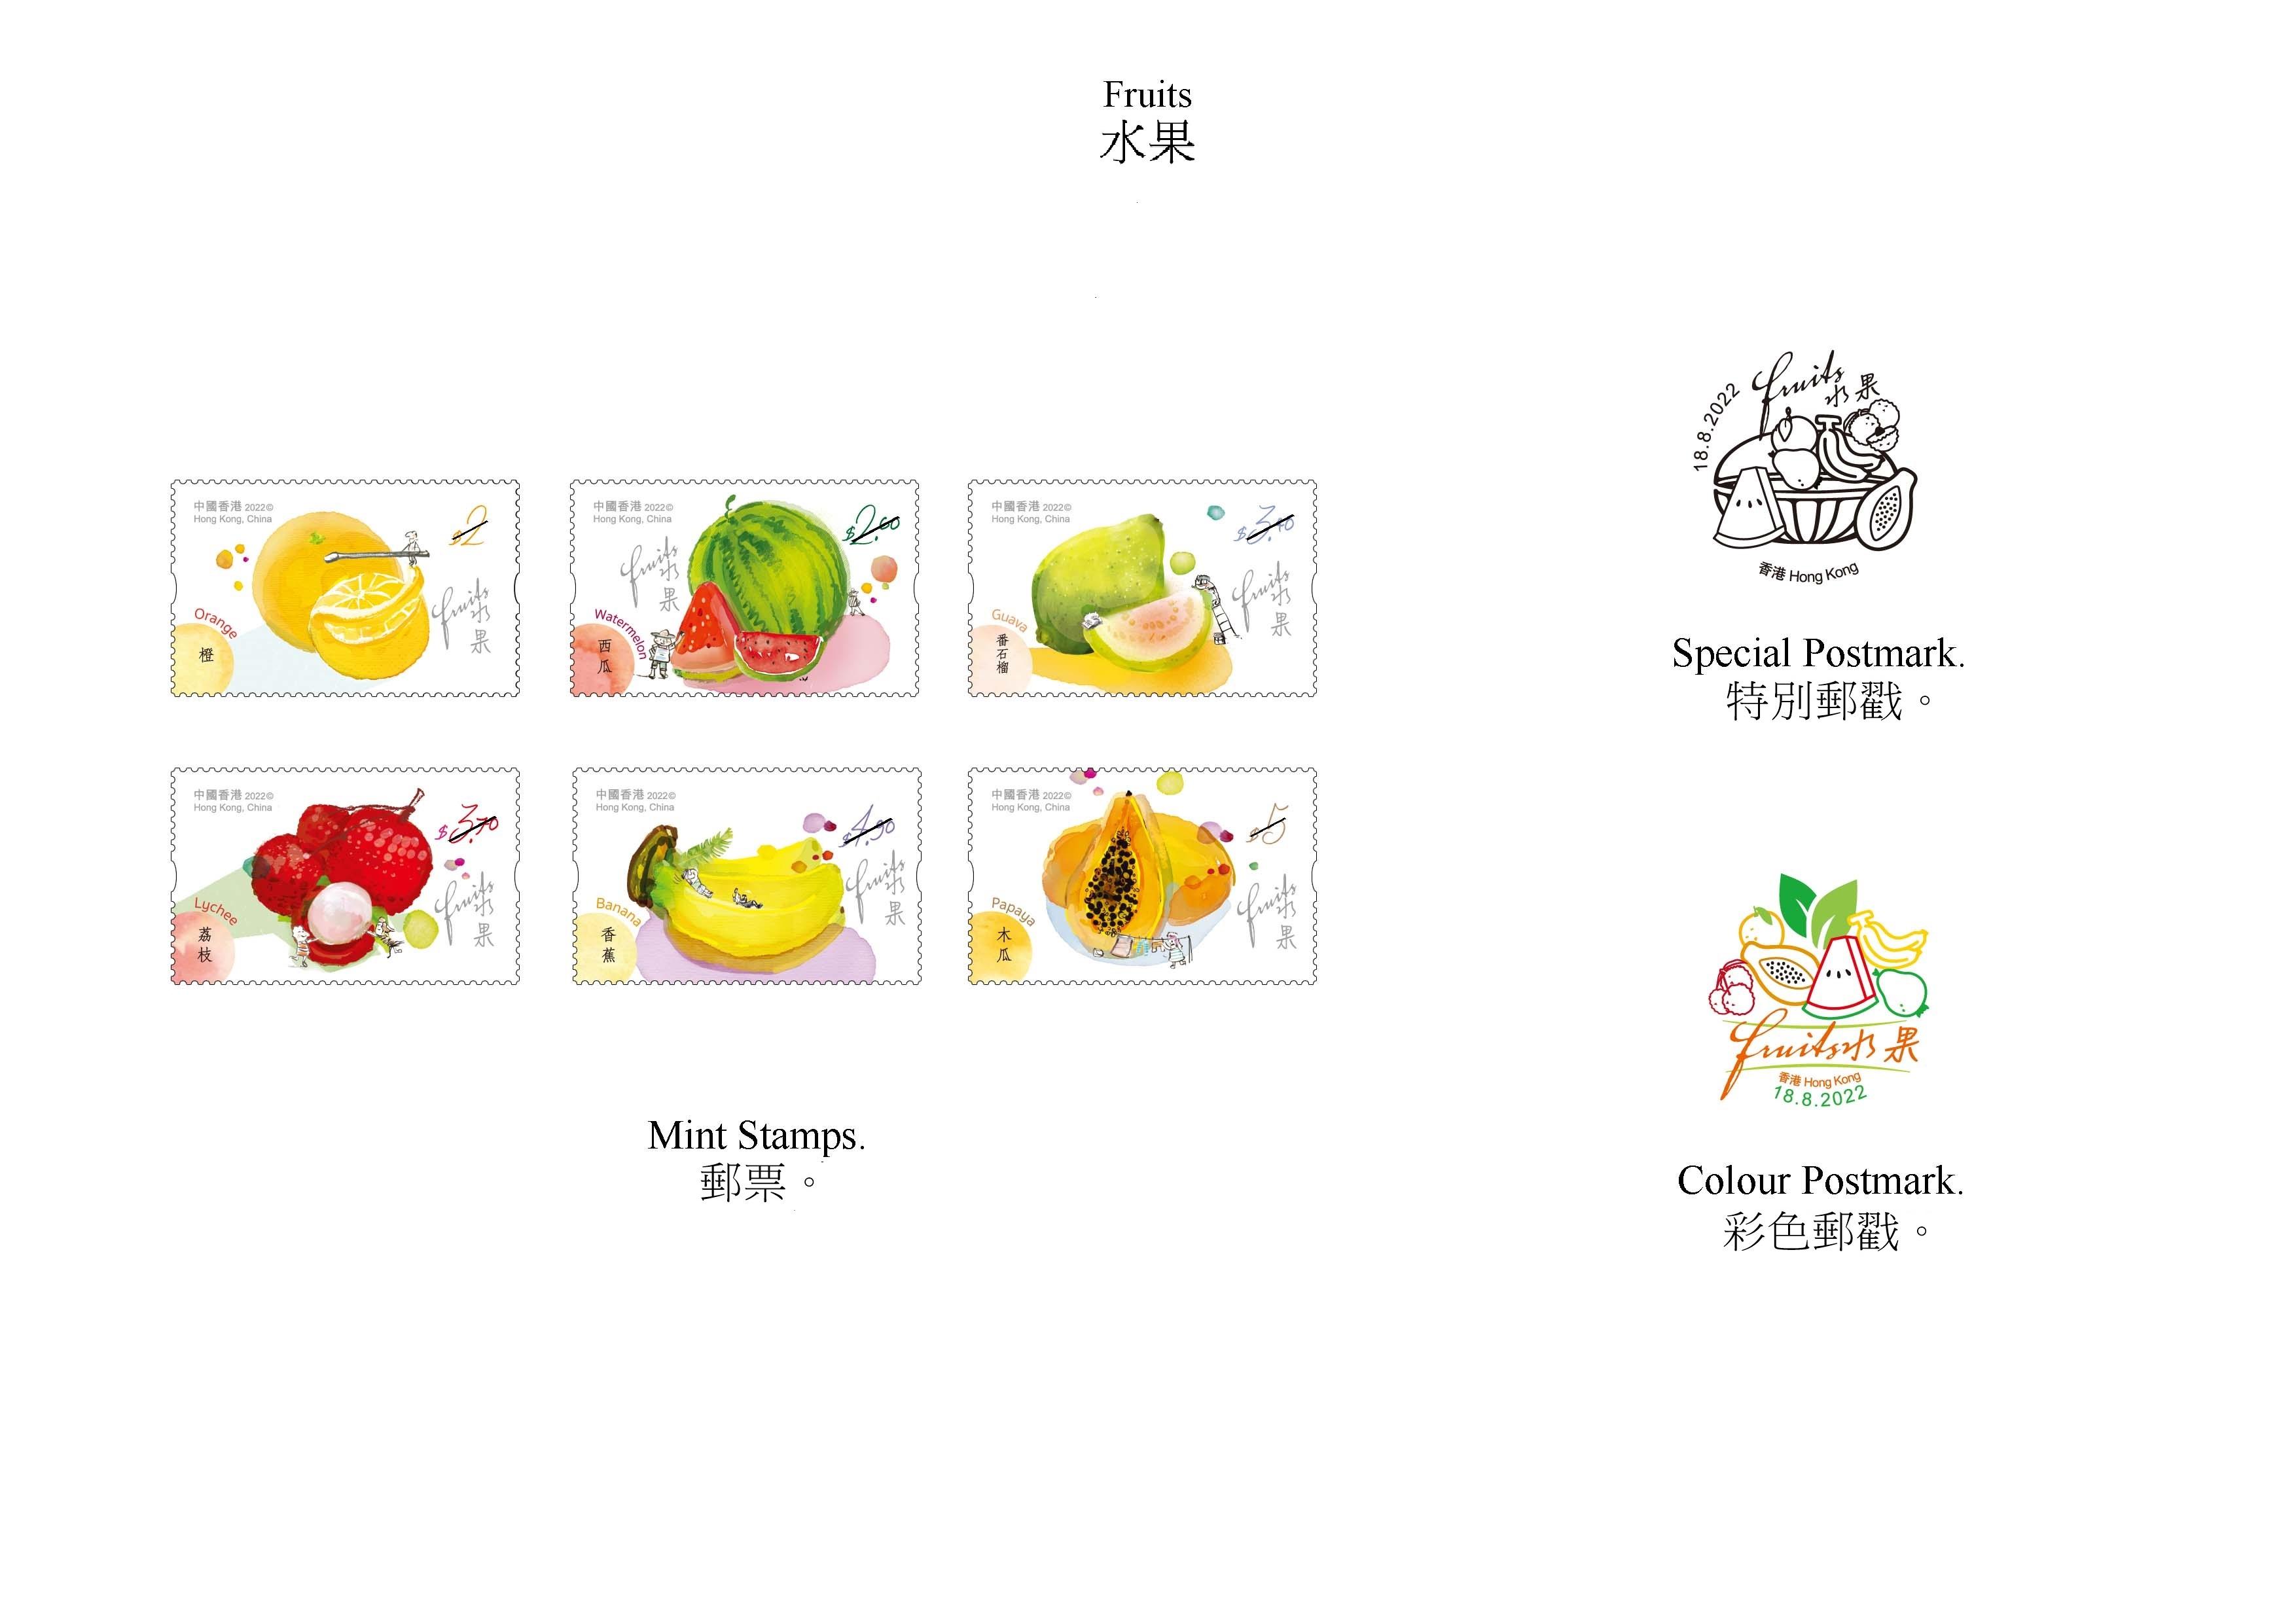 Hongkong Post will launch a special stamp issue and associated philatelic products on the theme of "Fruits" on August 18 (Thursday). Photo shows the mint stamps, the special postmark and the colour postmark.